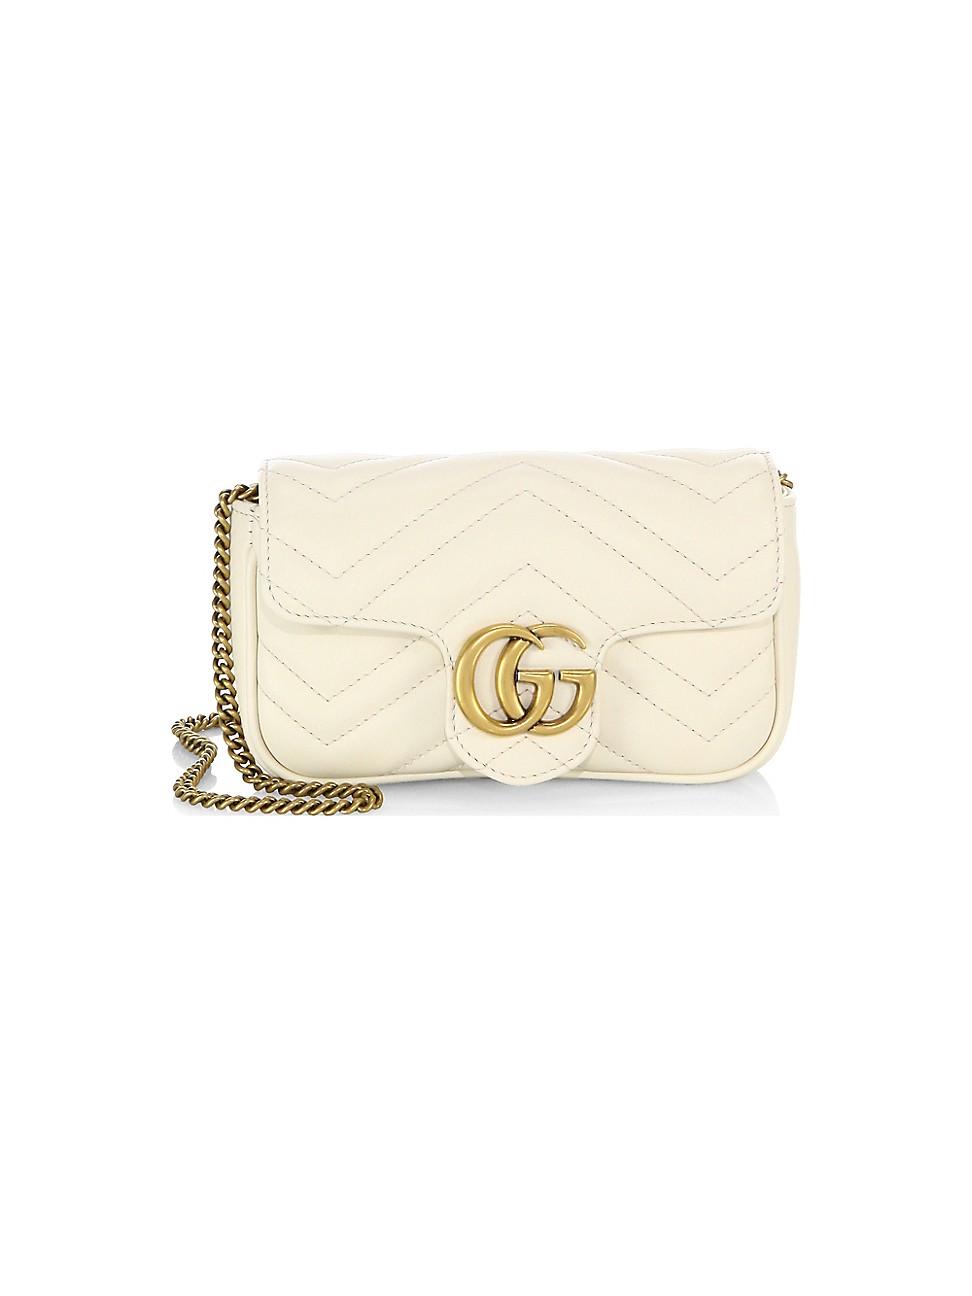 redden globaal Sceptisch Gucci Gg Marmont Matelasse Leather Mini Chain Shoulder Bag in White - Lyst